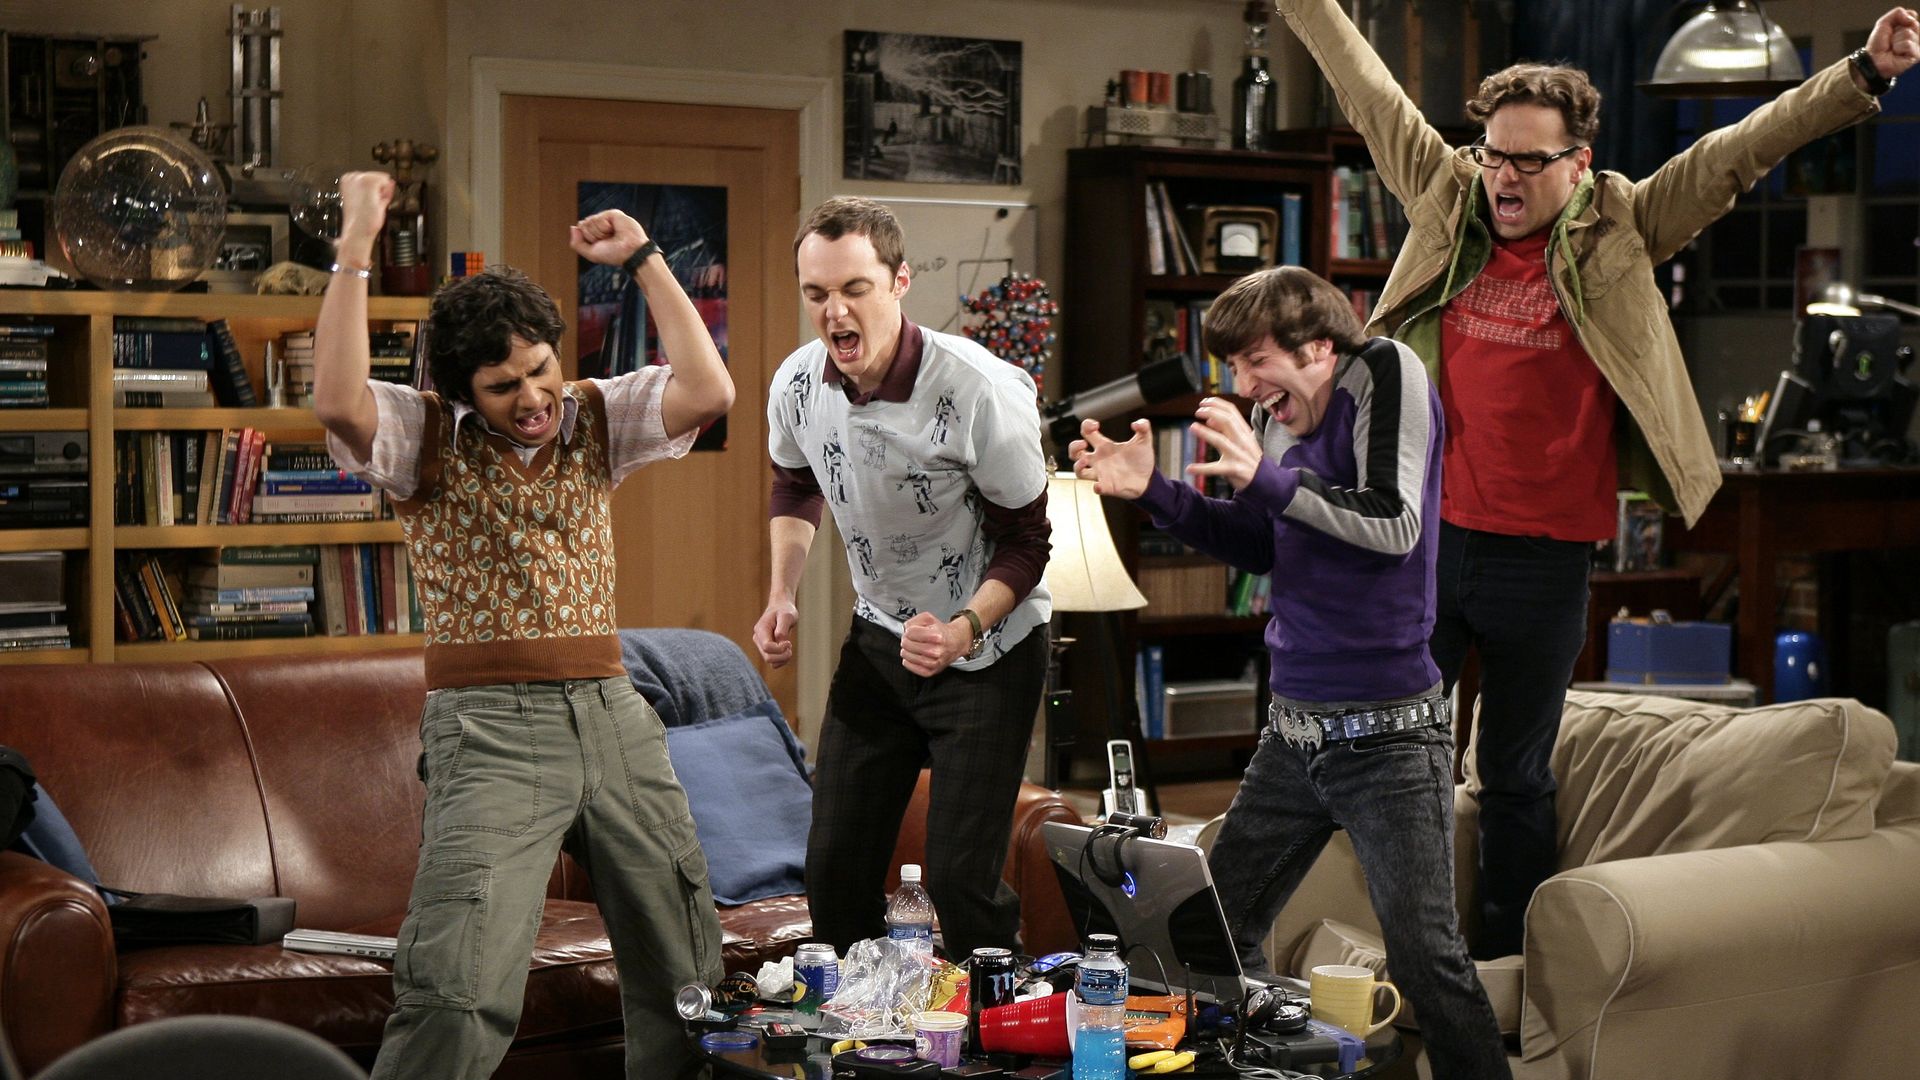 New 'Big Bang Theory' spinoff in development - Good Morning America